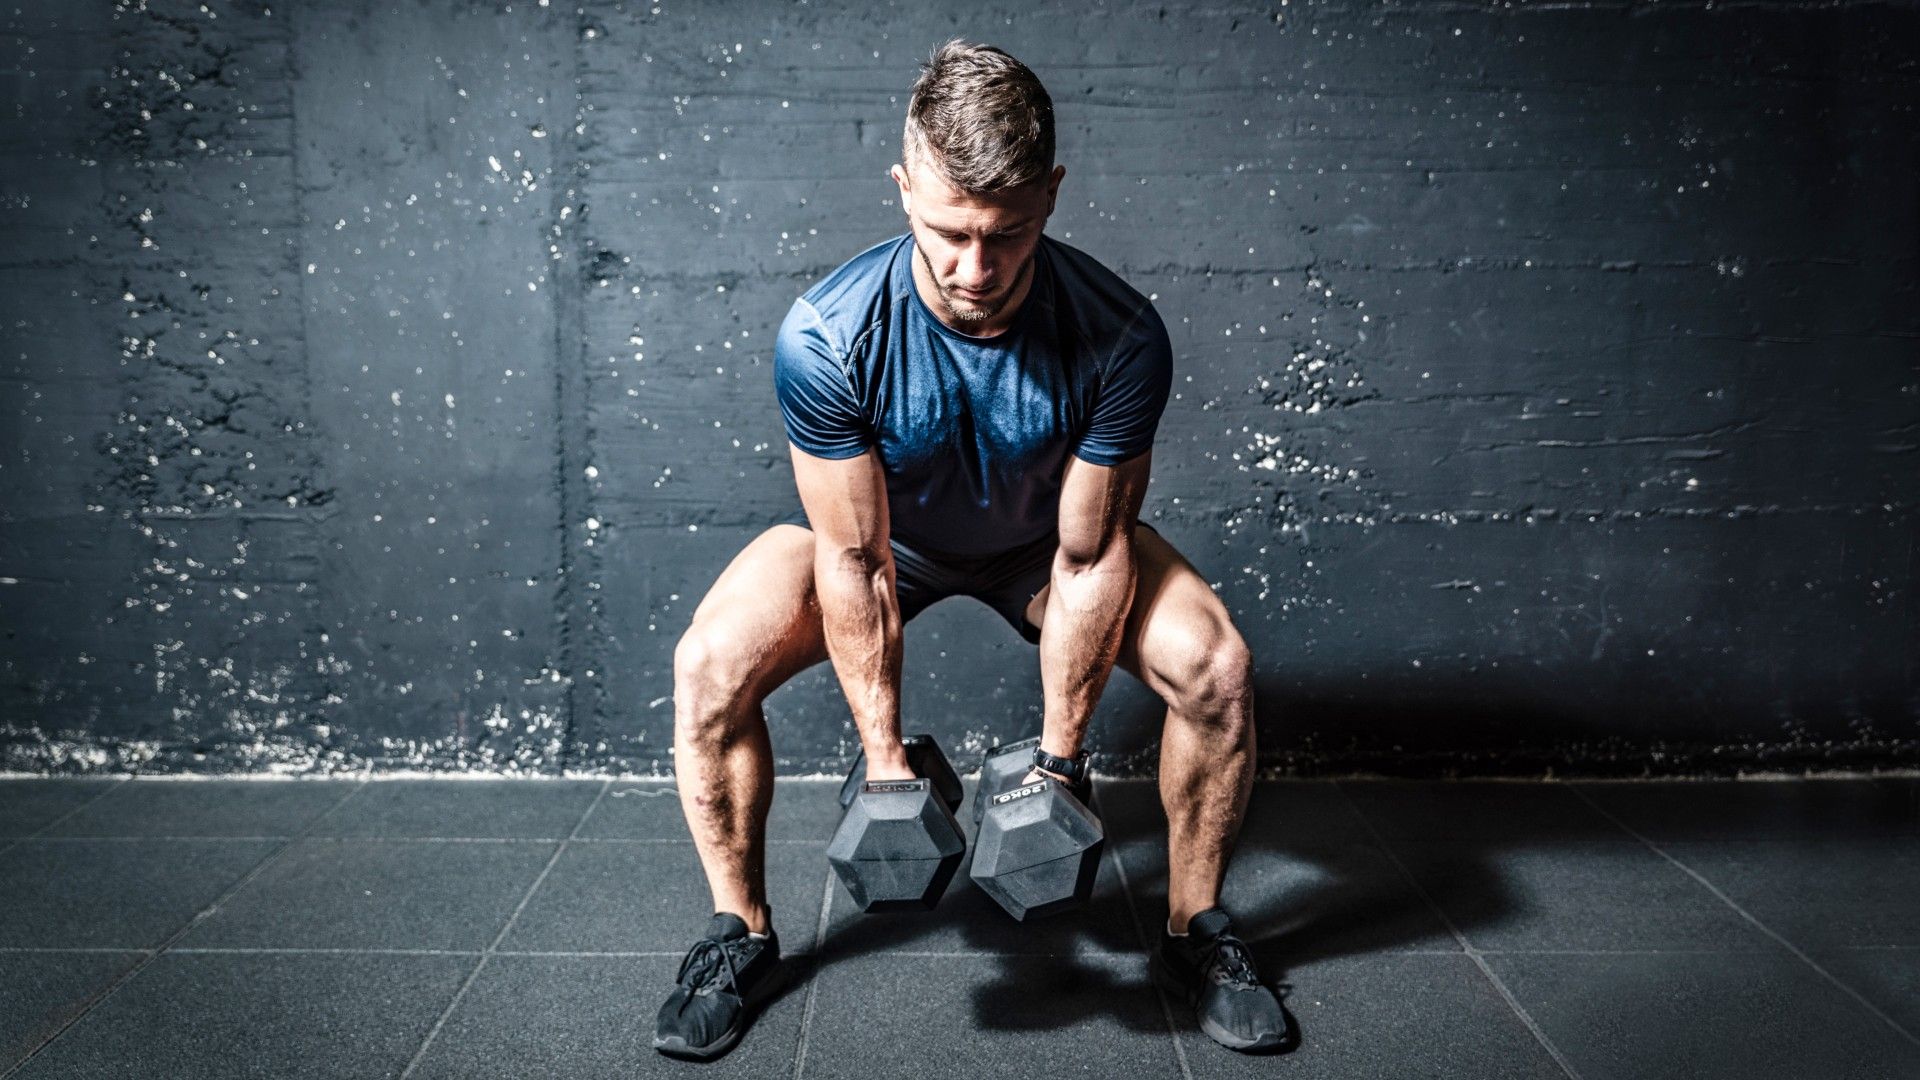 forget burpees — this 3-move crossfit workout strengthens your entire body using dumbbells